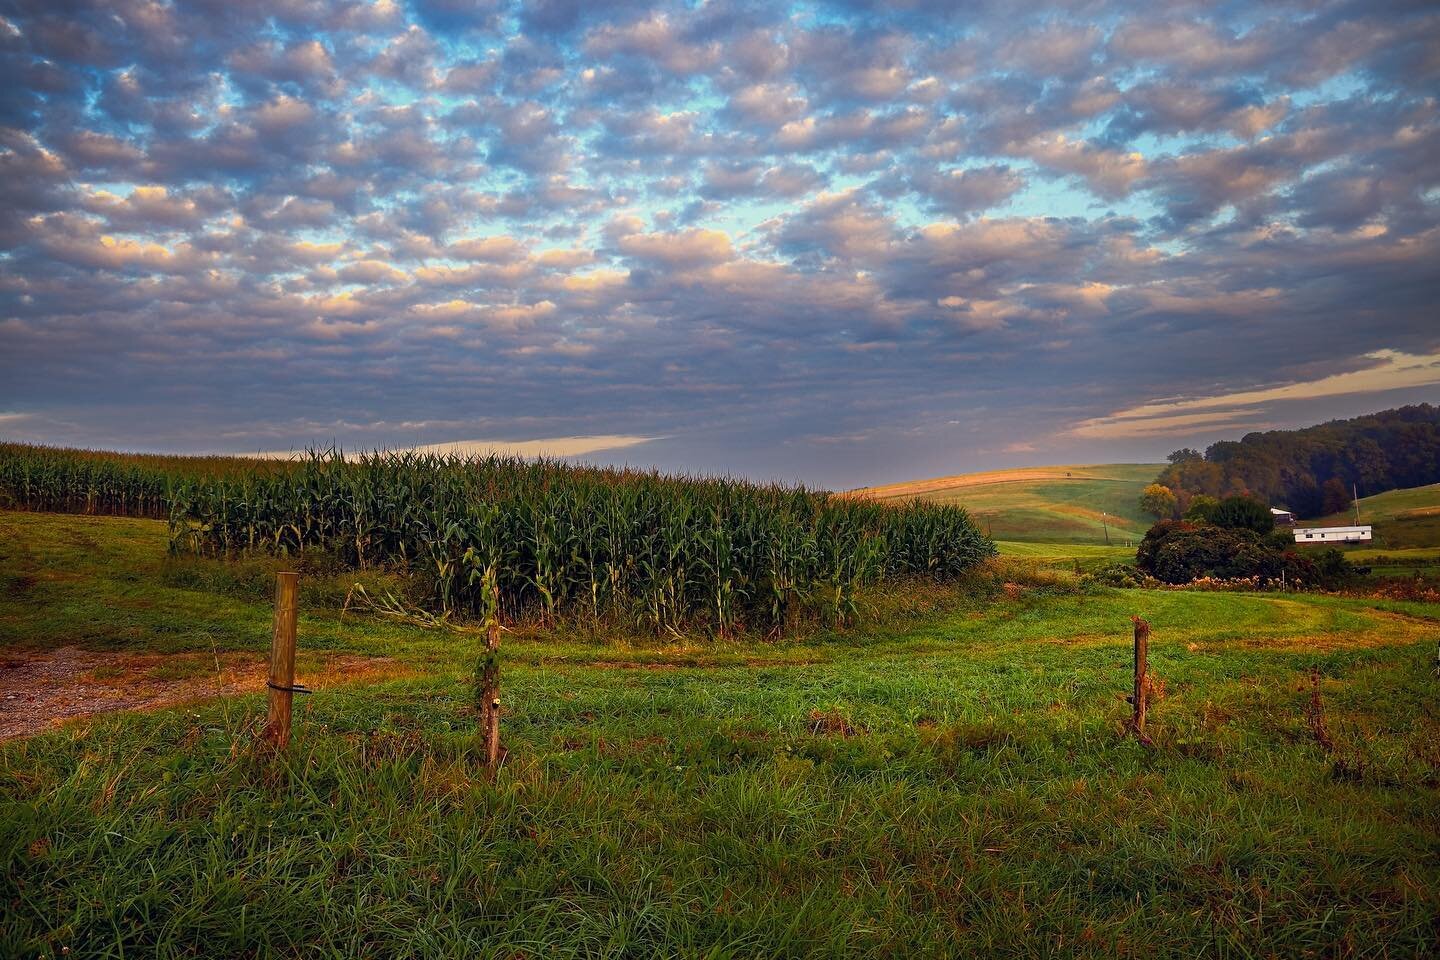 &ldquo;Morning Light in the Cornfield&rdquo;
Plum Boro, Pennsylvania
2023

After a vibrant sunrise, the clouds complemented the patchiness of the cornfield of a nearby farm on the morning of September 21, 2023. 

#canon #landscapephotography #sunrise